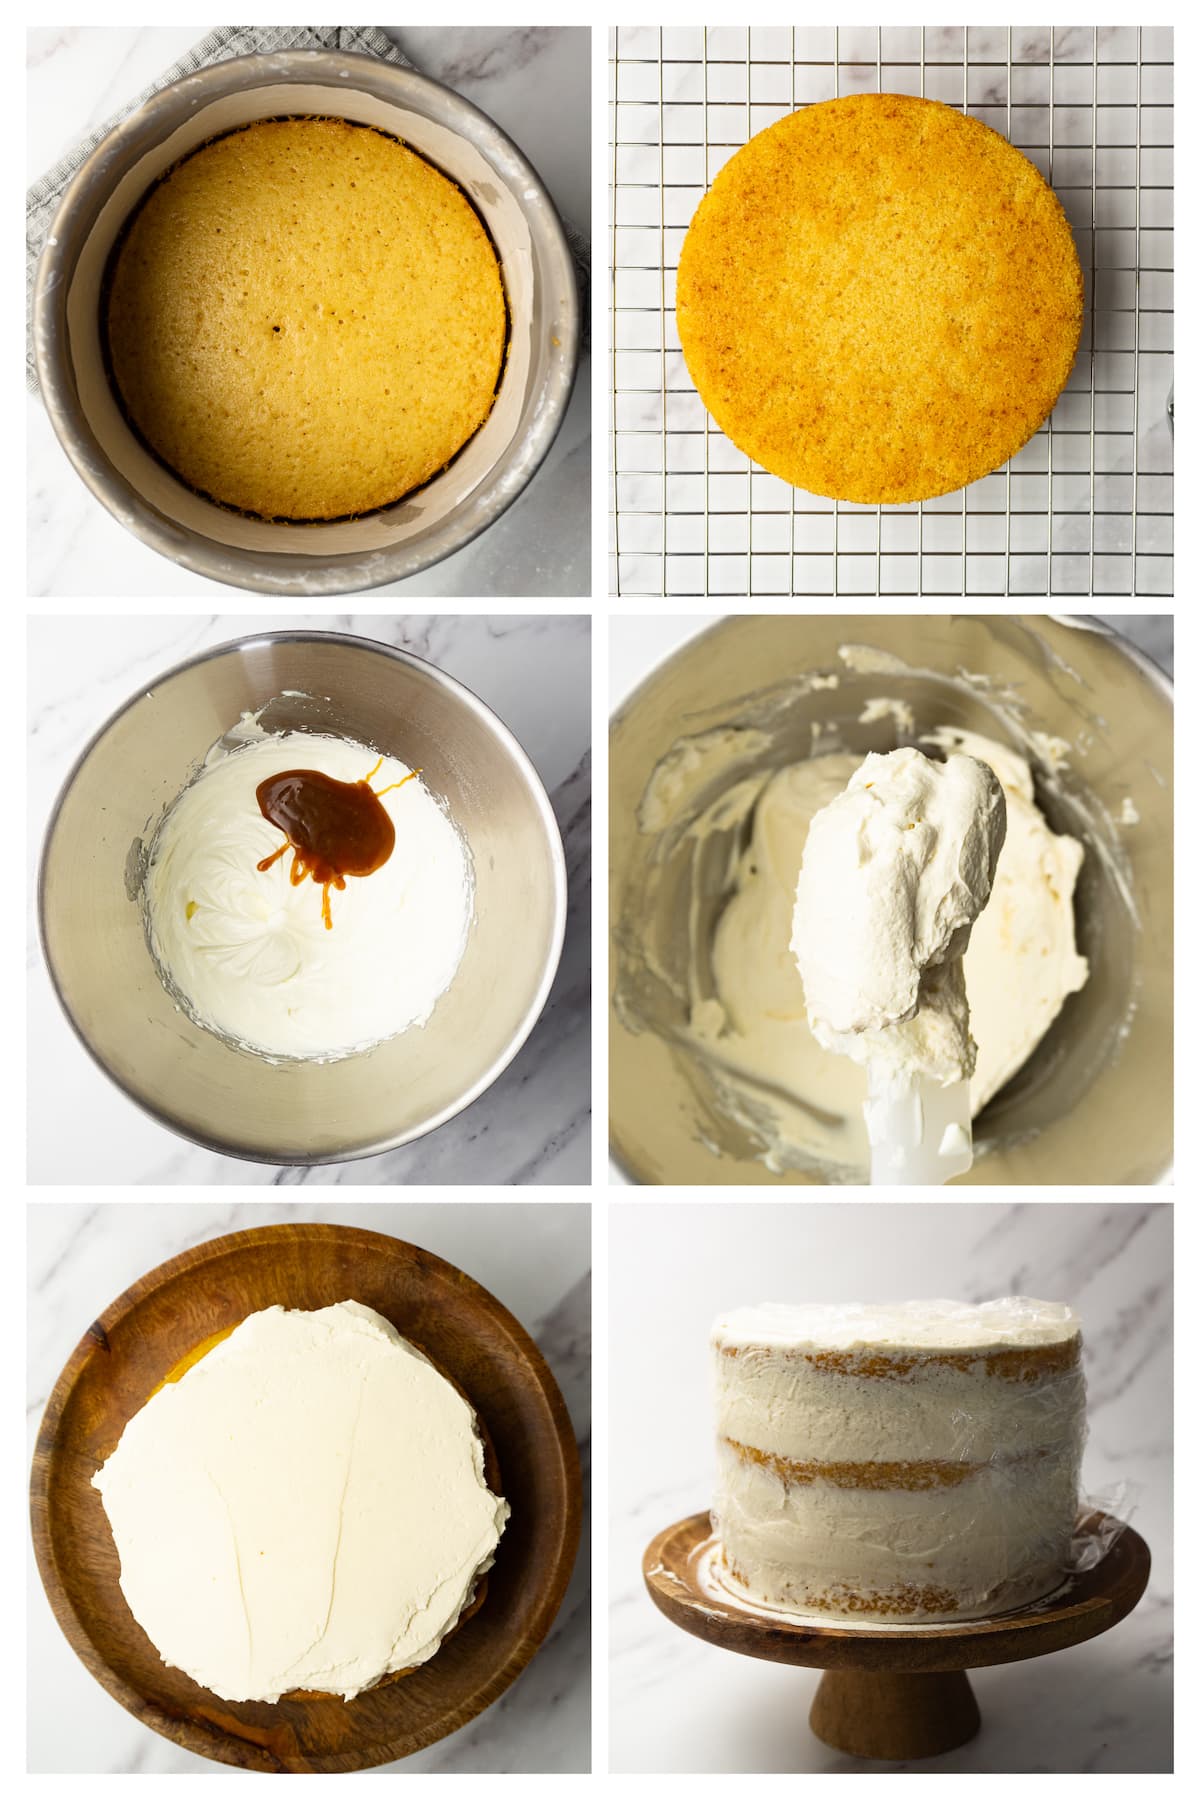 Collage image showing how to make make caramel frosting with mascarpone cheese and assemble caramel cake with it.